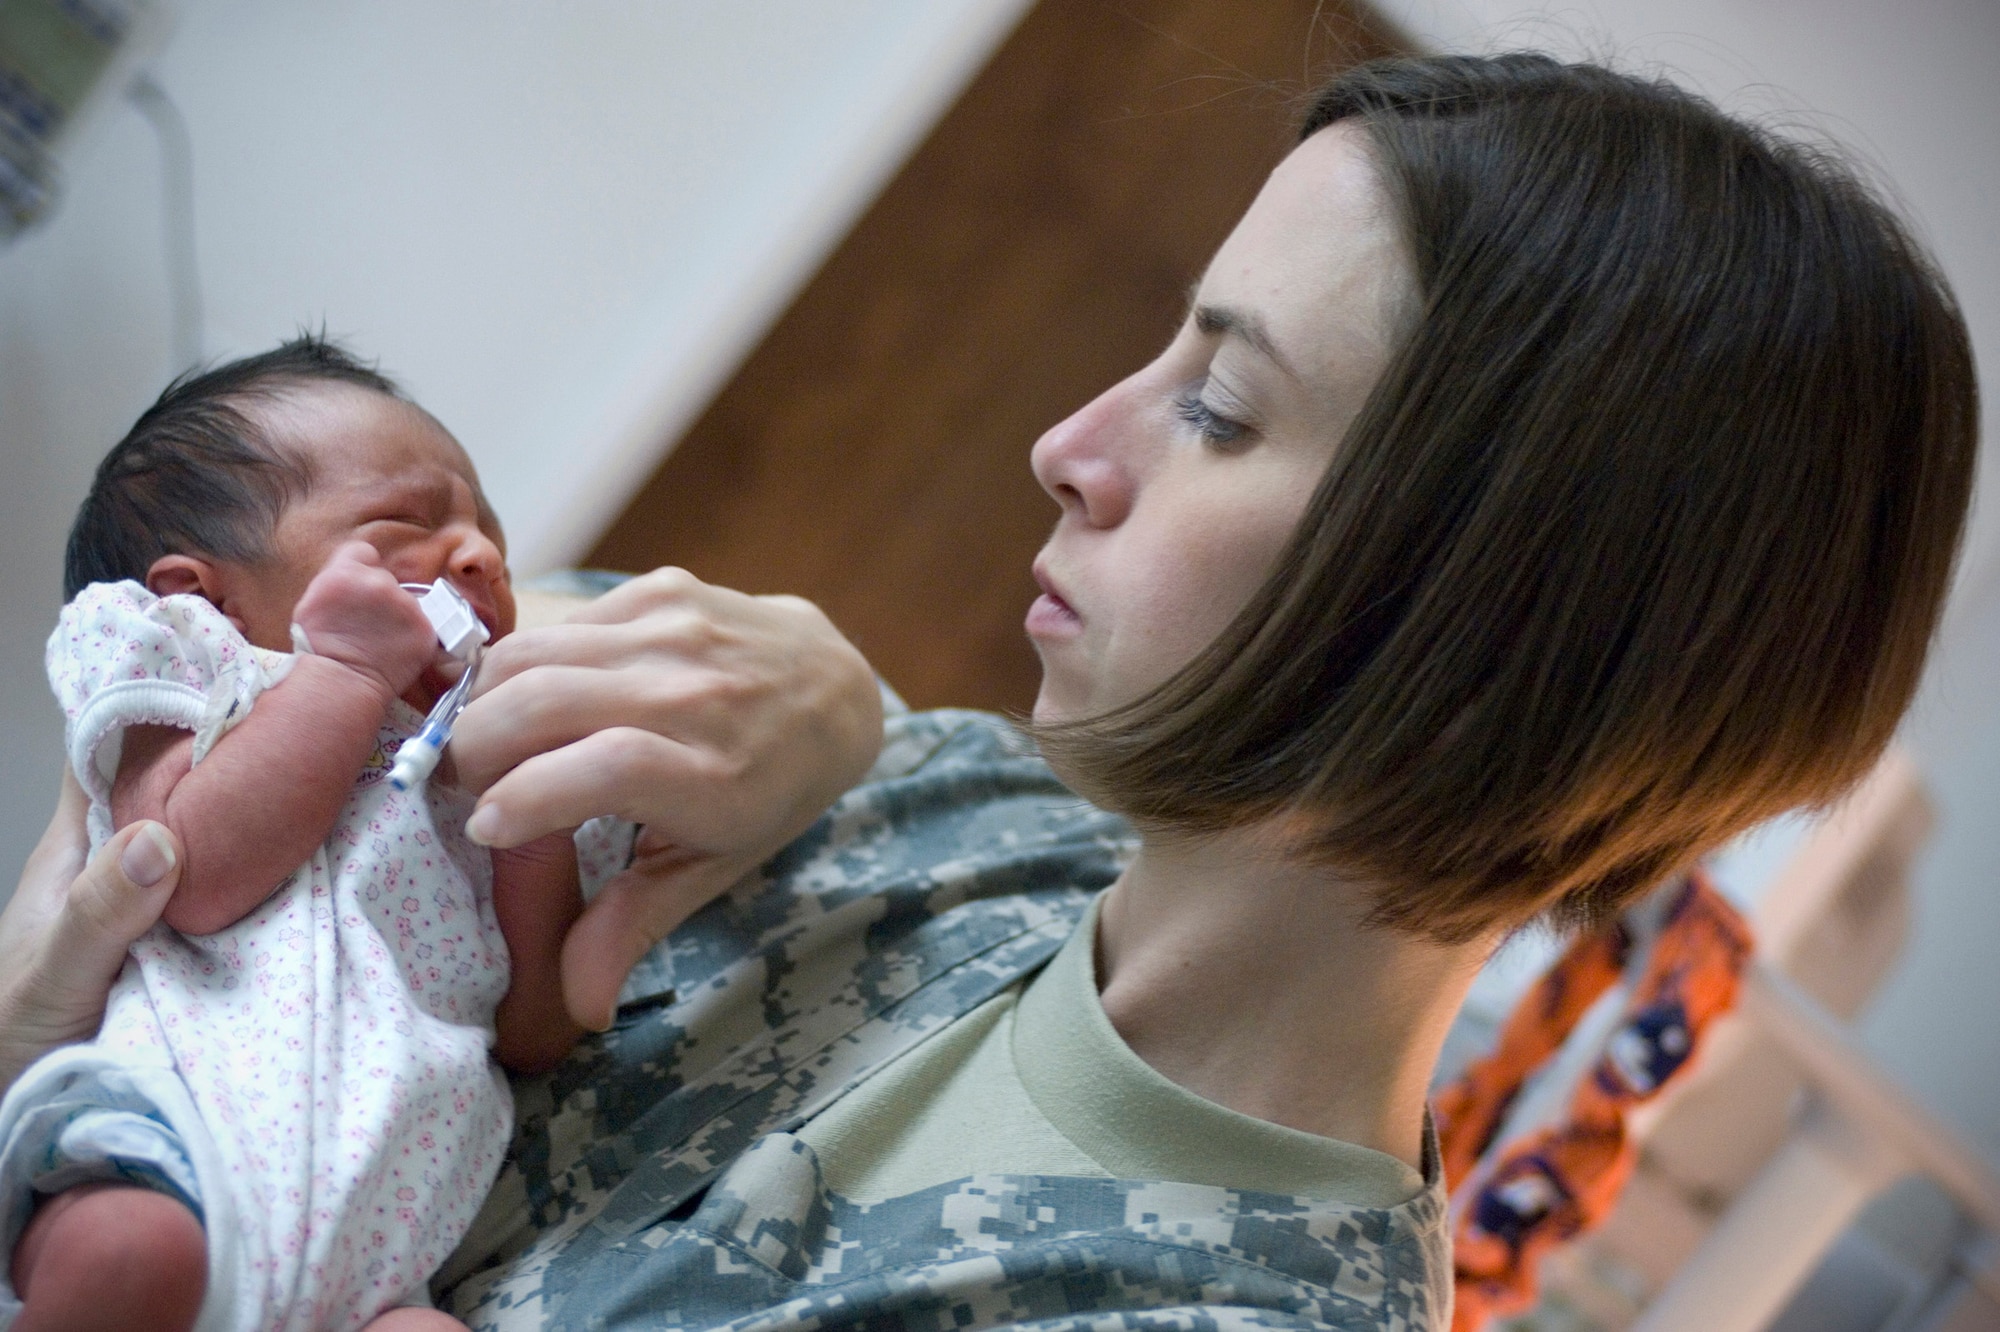 Intensive care unit nurse 1st Lt. Michelle Pierson, deployed from Travis Air Force Base, Calif., examines Zahra, the first Afghan baby born at Craig Joint Theater Hospital, Oct. 6 at Bagram Air Field, Afghanistan. Lacking a neonatal ward, intensive care unit nurses have taken on the role of watching after the newborn. (U.S. Air Force photo by Staff Sgt. Rachel Martinez)